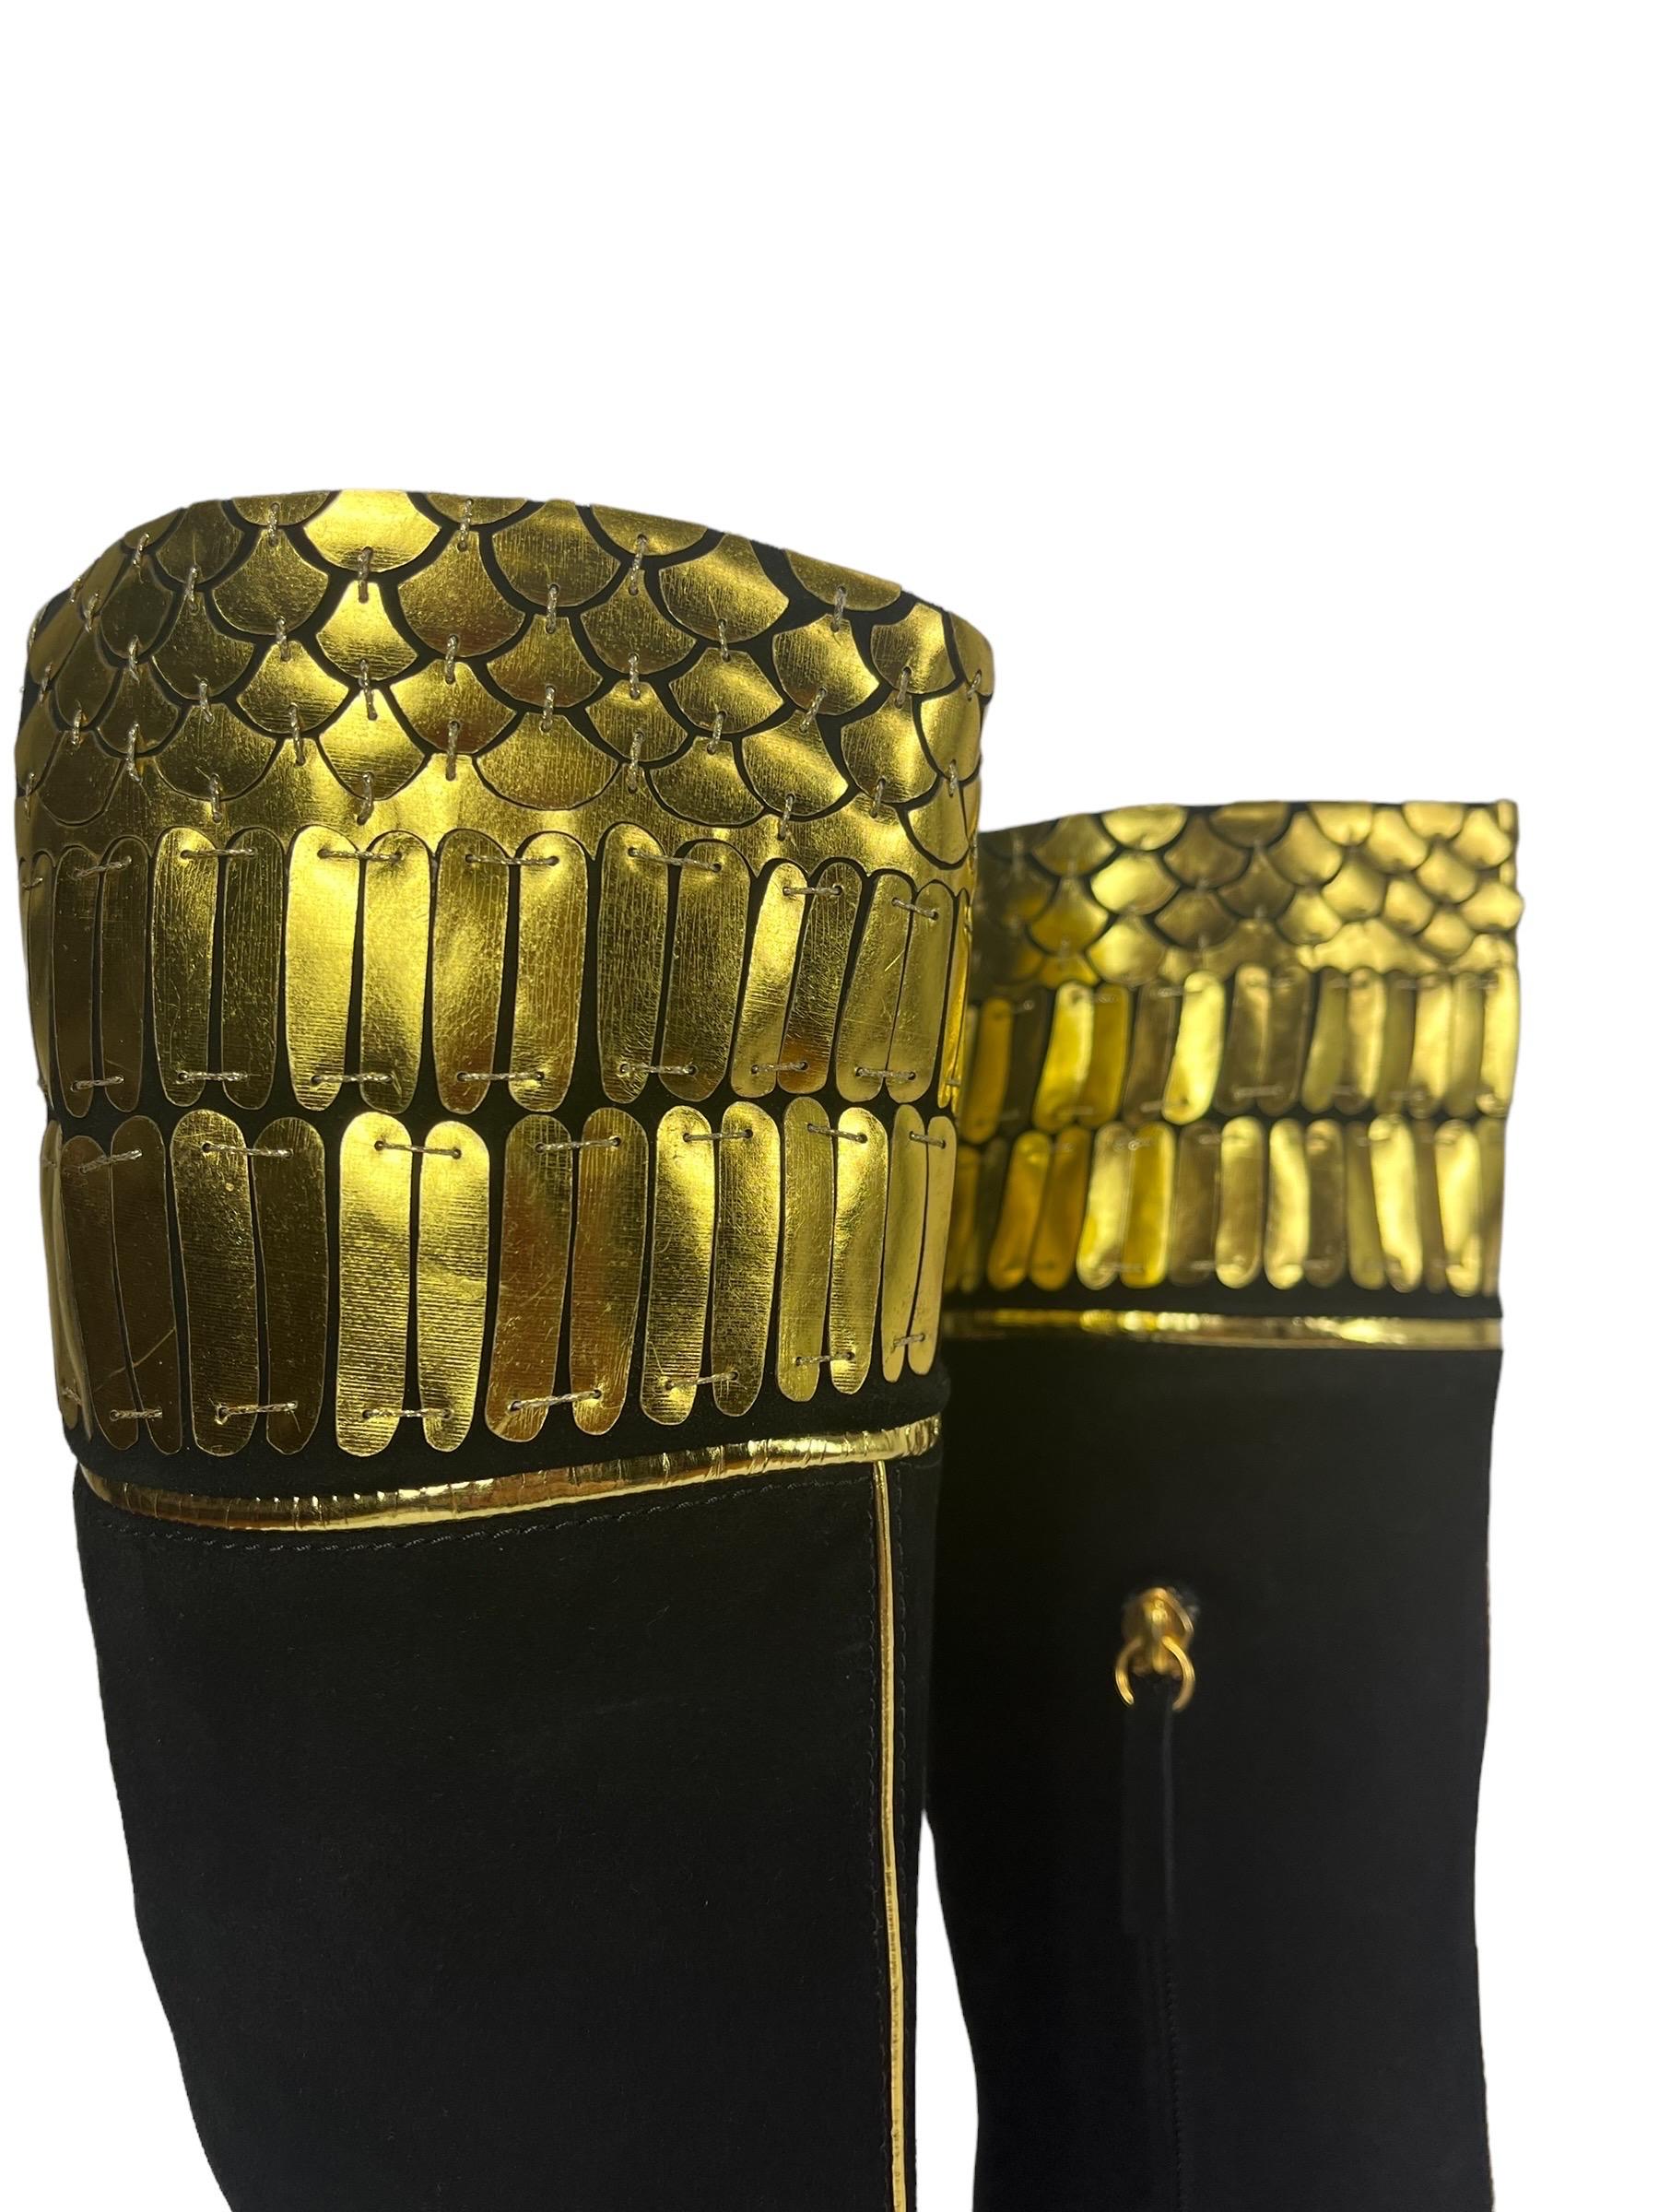 New Roberto Cavalli Black Suede Leather Knee Length Boots Gold Detail 38.5 & 41 For Sale 1